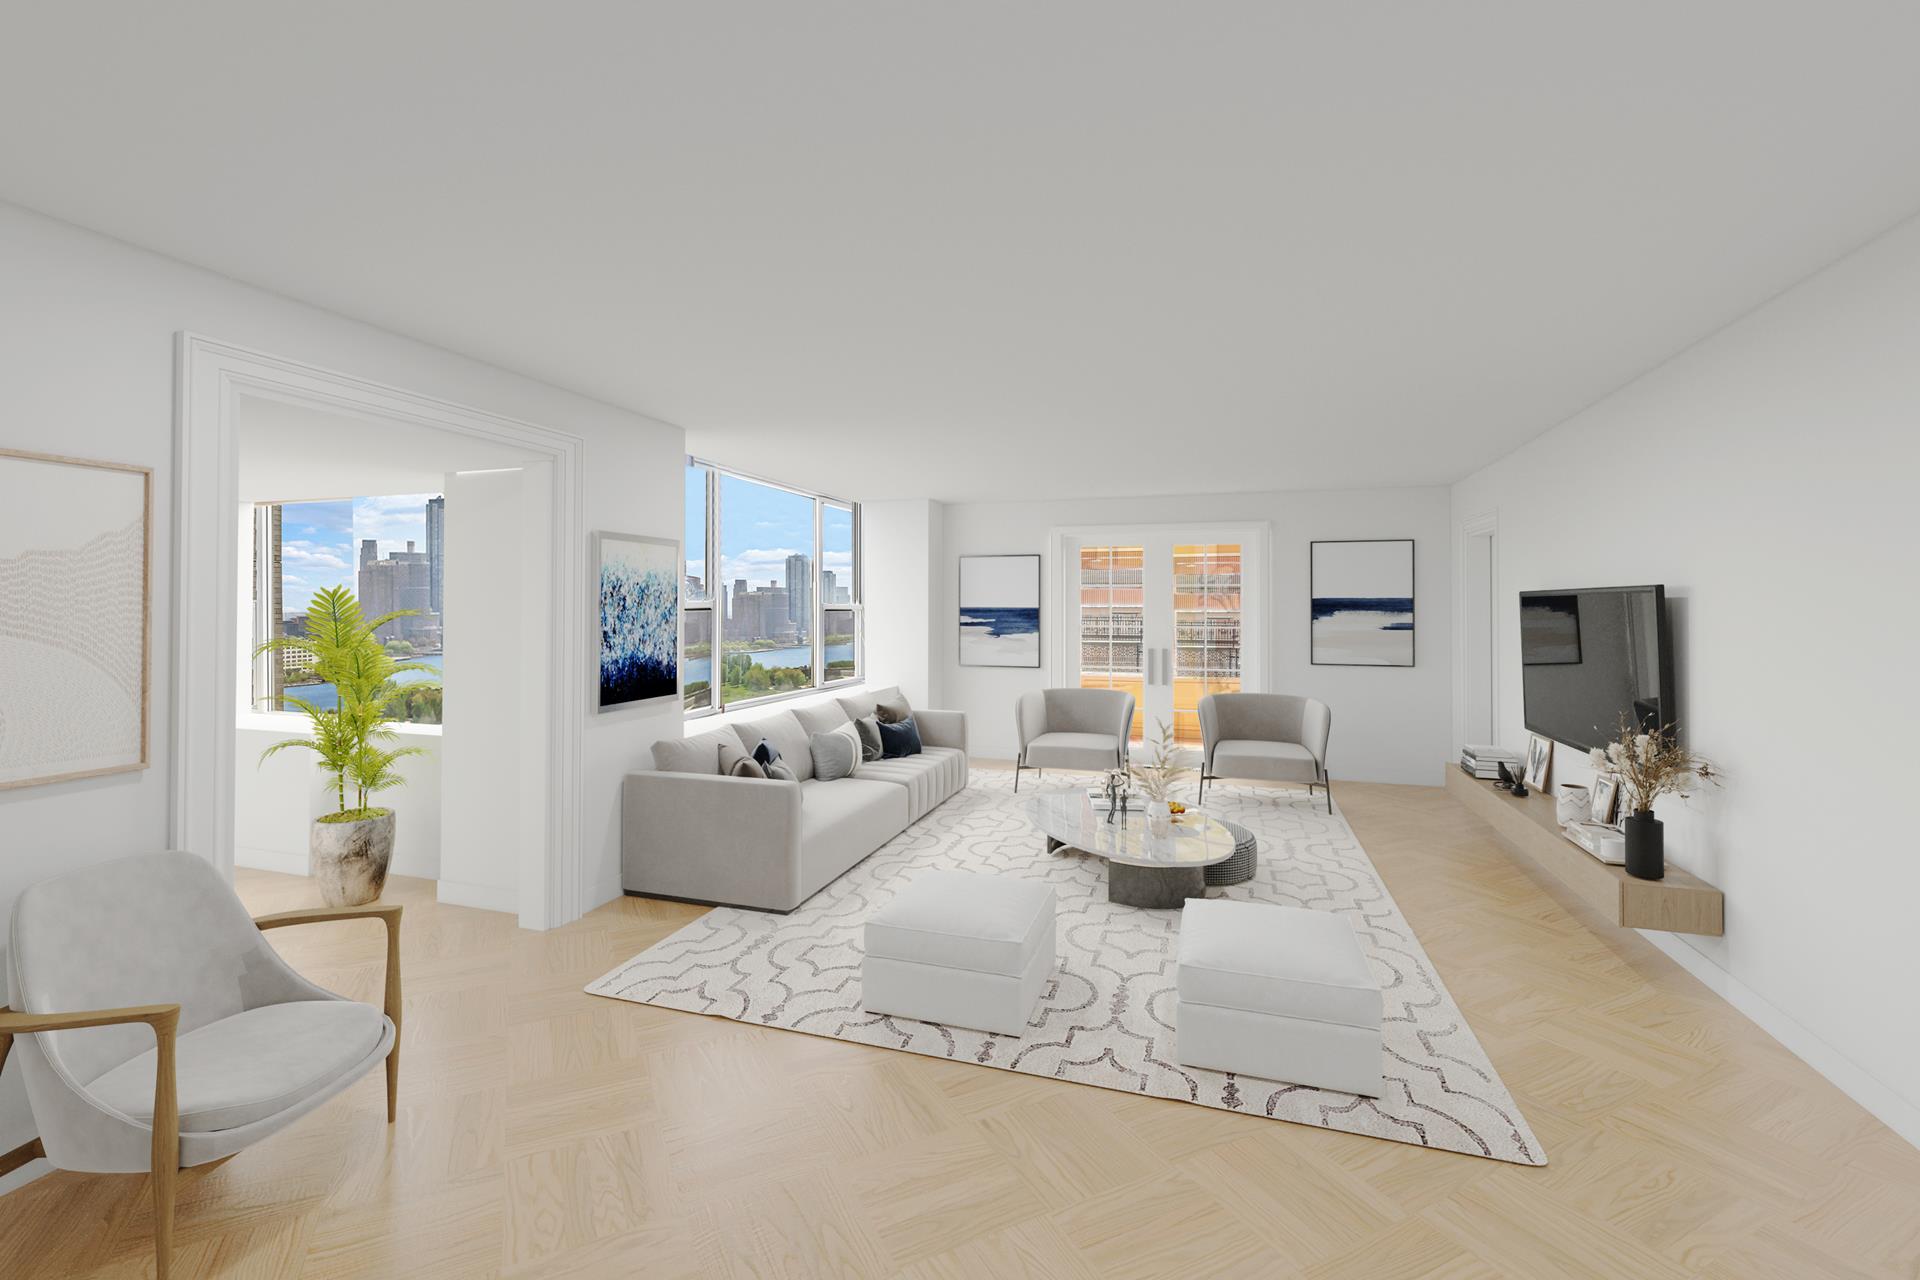 35 Sutton Place 21D, Sutton, Midtown East, NYC - 3 Bedrooms  
3.5 Bathrooms  
8 Rooms - 